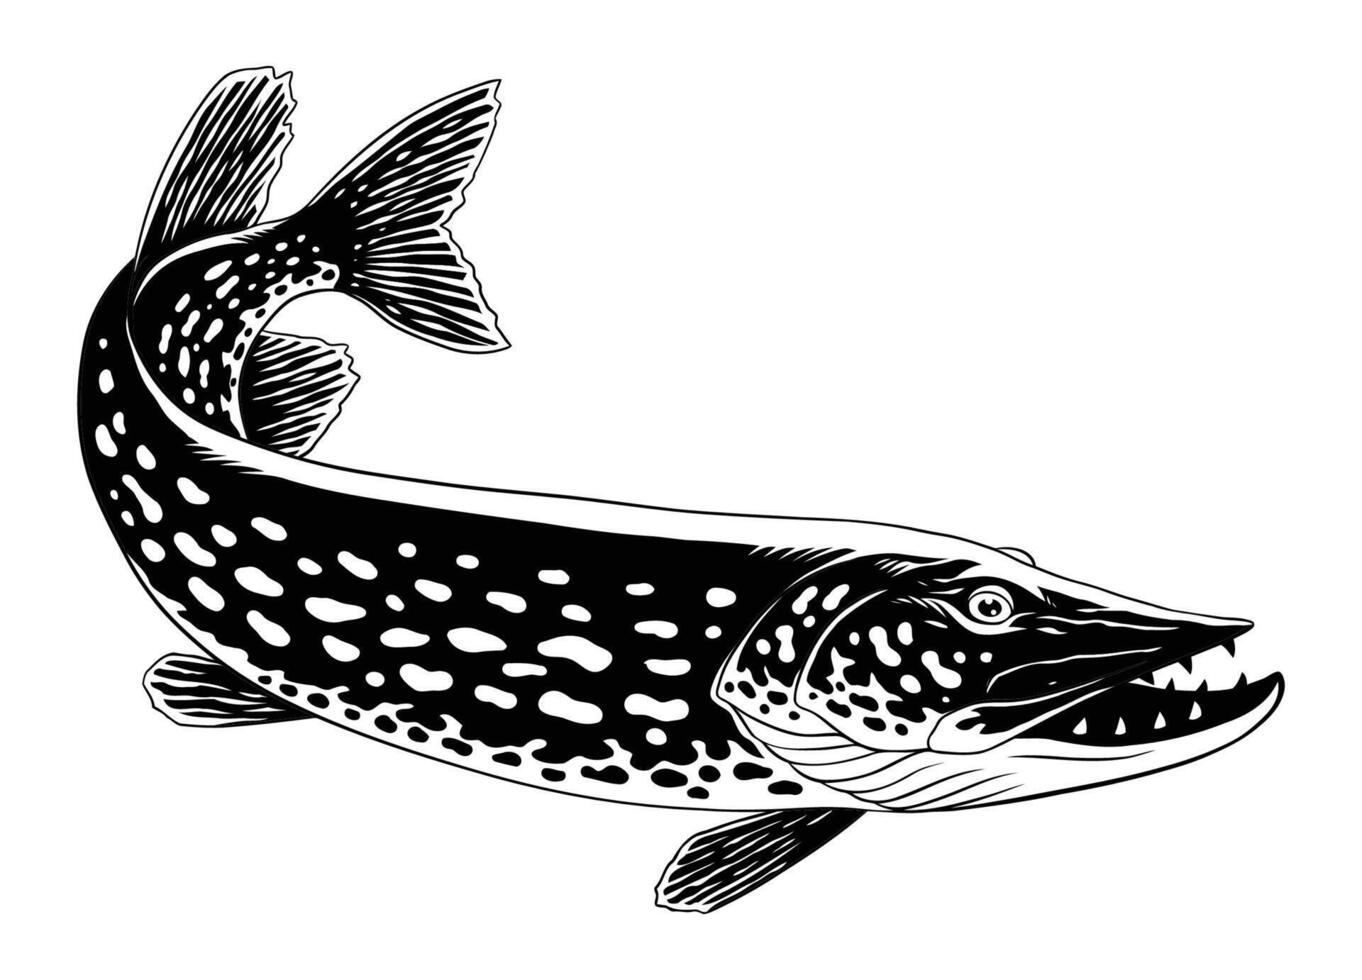 Pike Fish Vintage Black and White Hand Drawn Illustration vector